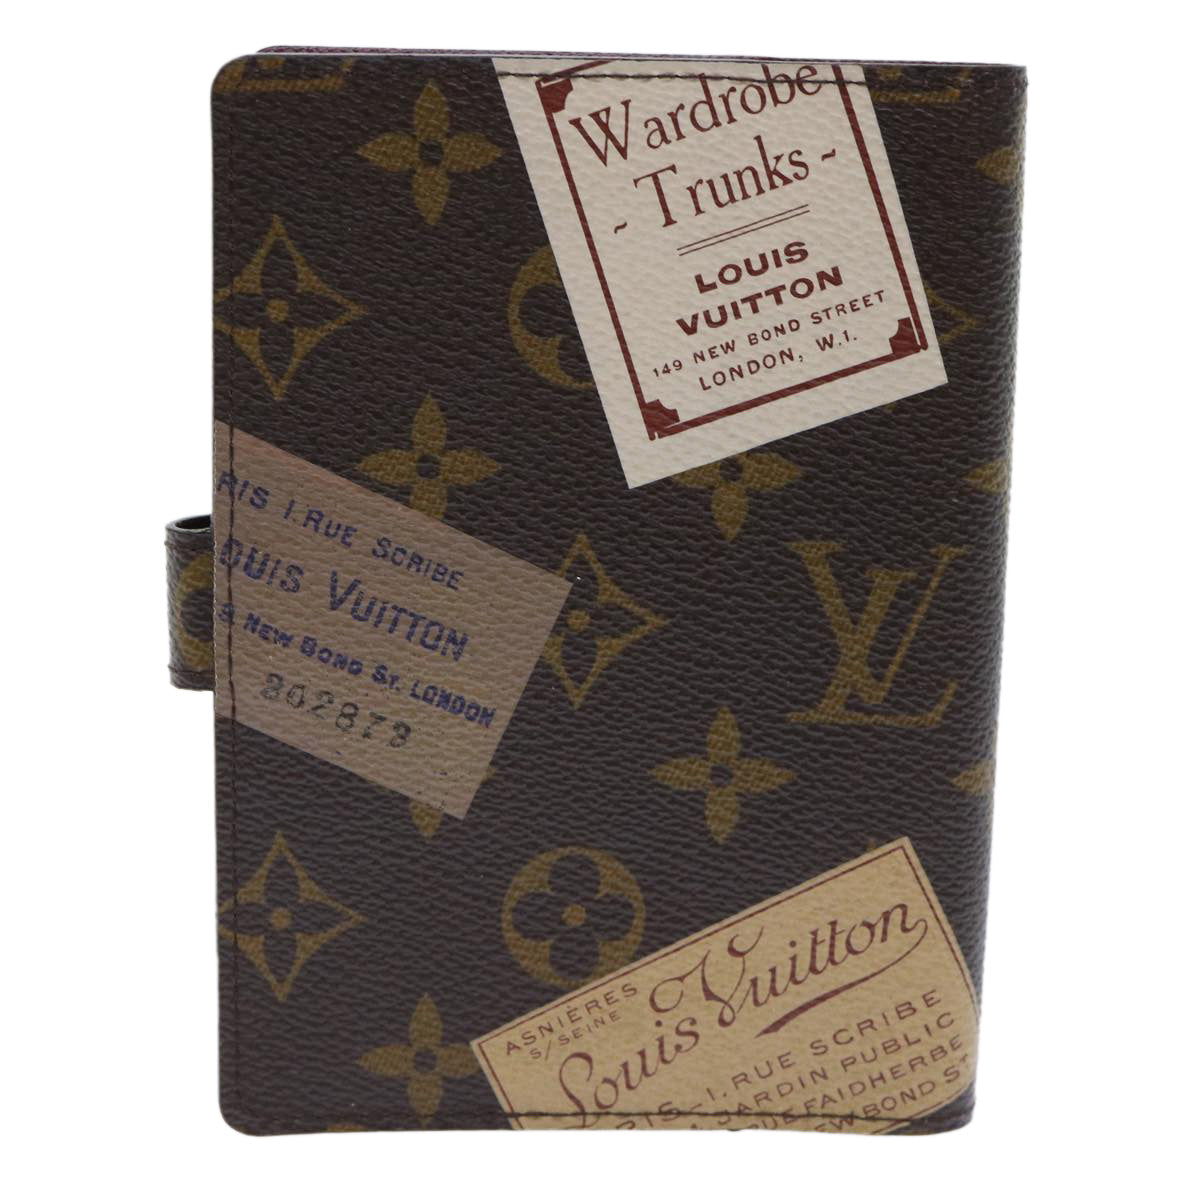 LOUIS VUITTON Travel Collection Agenda PM Day Planner Cover R21066 Auth 50894